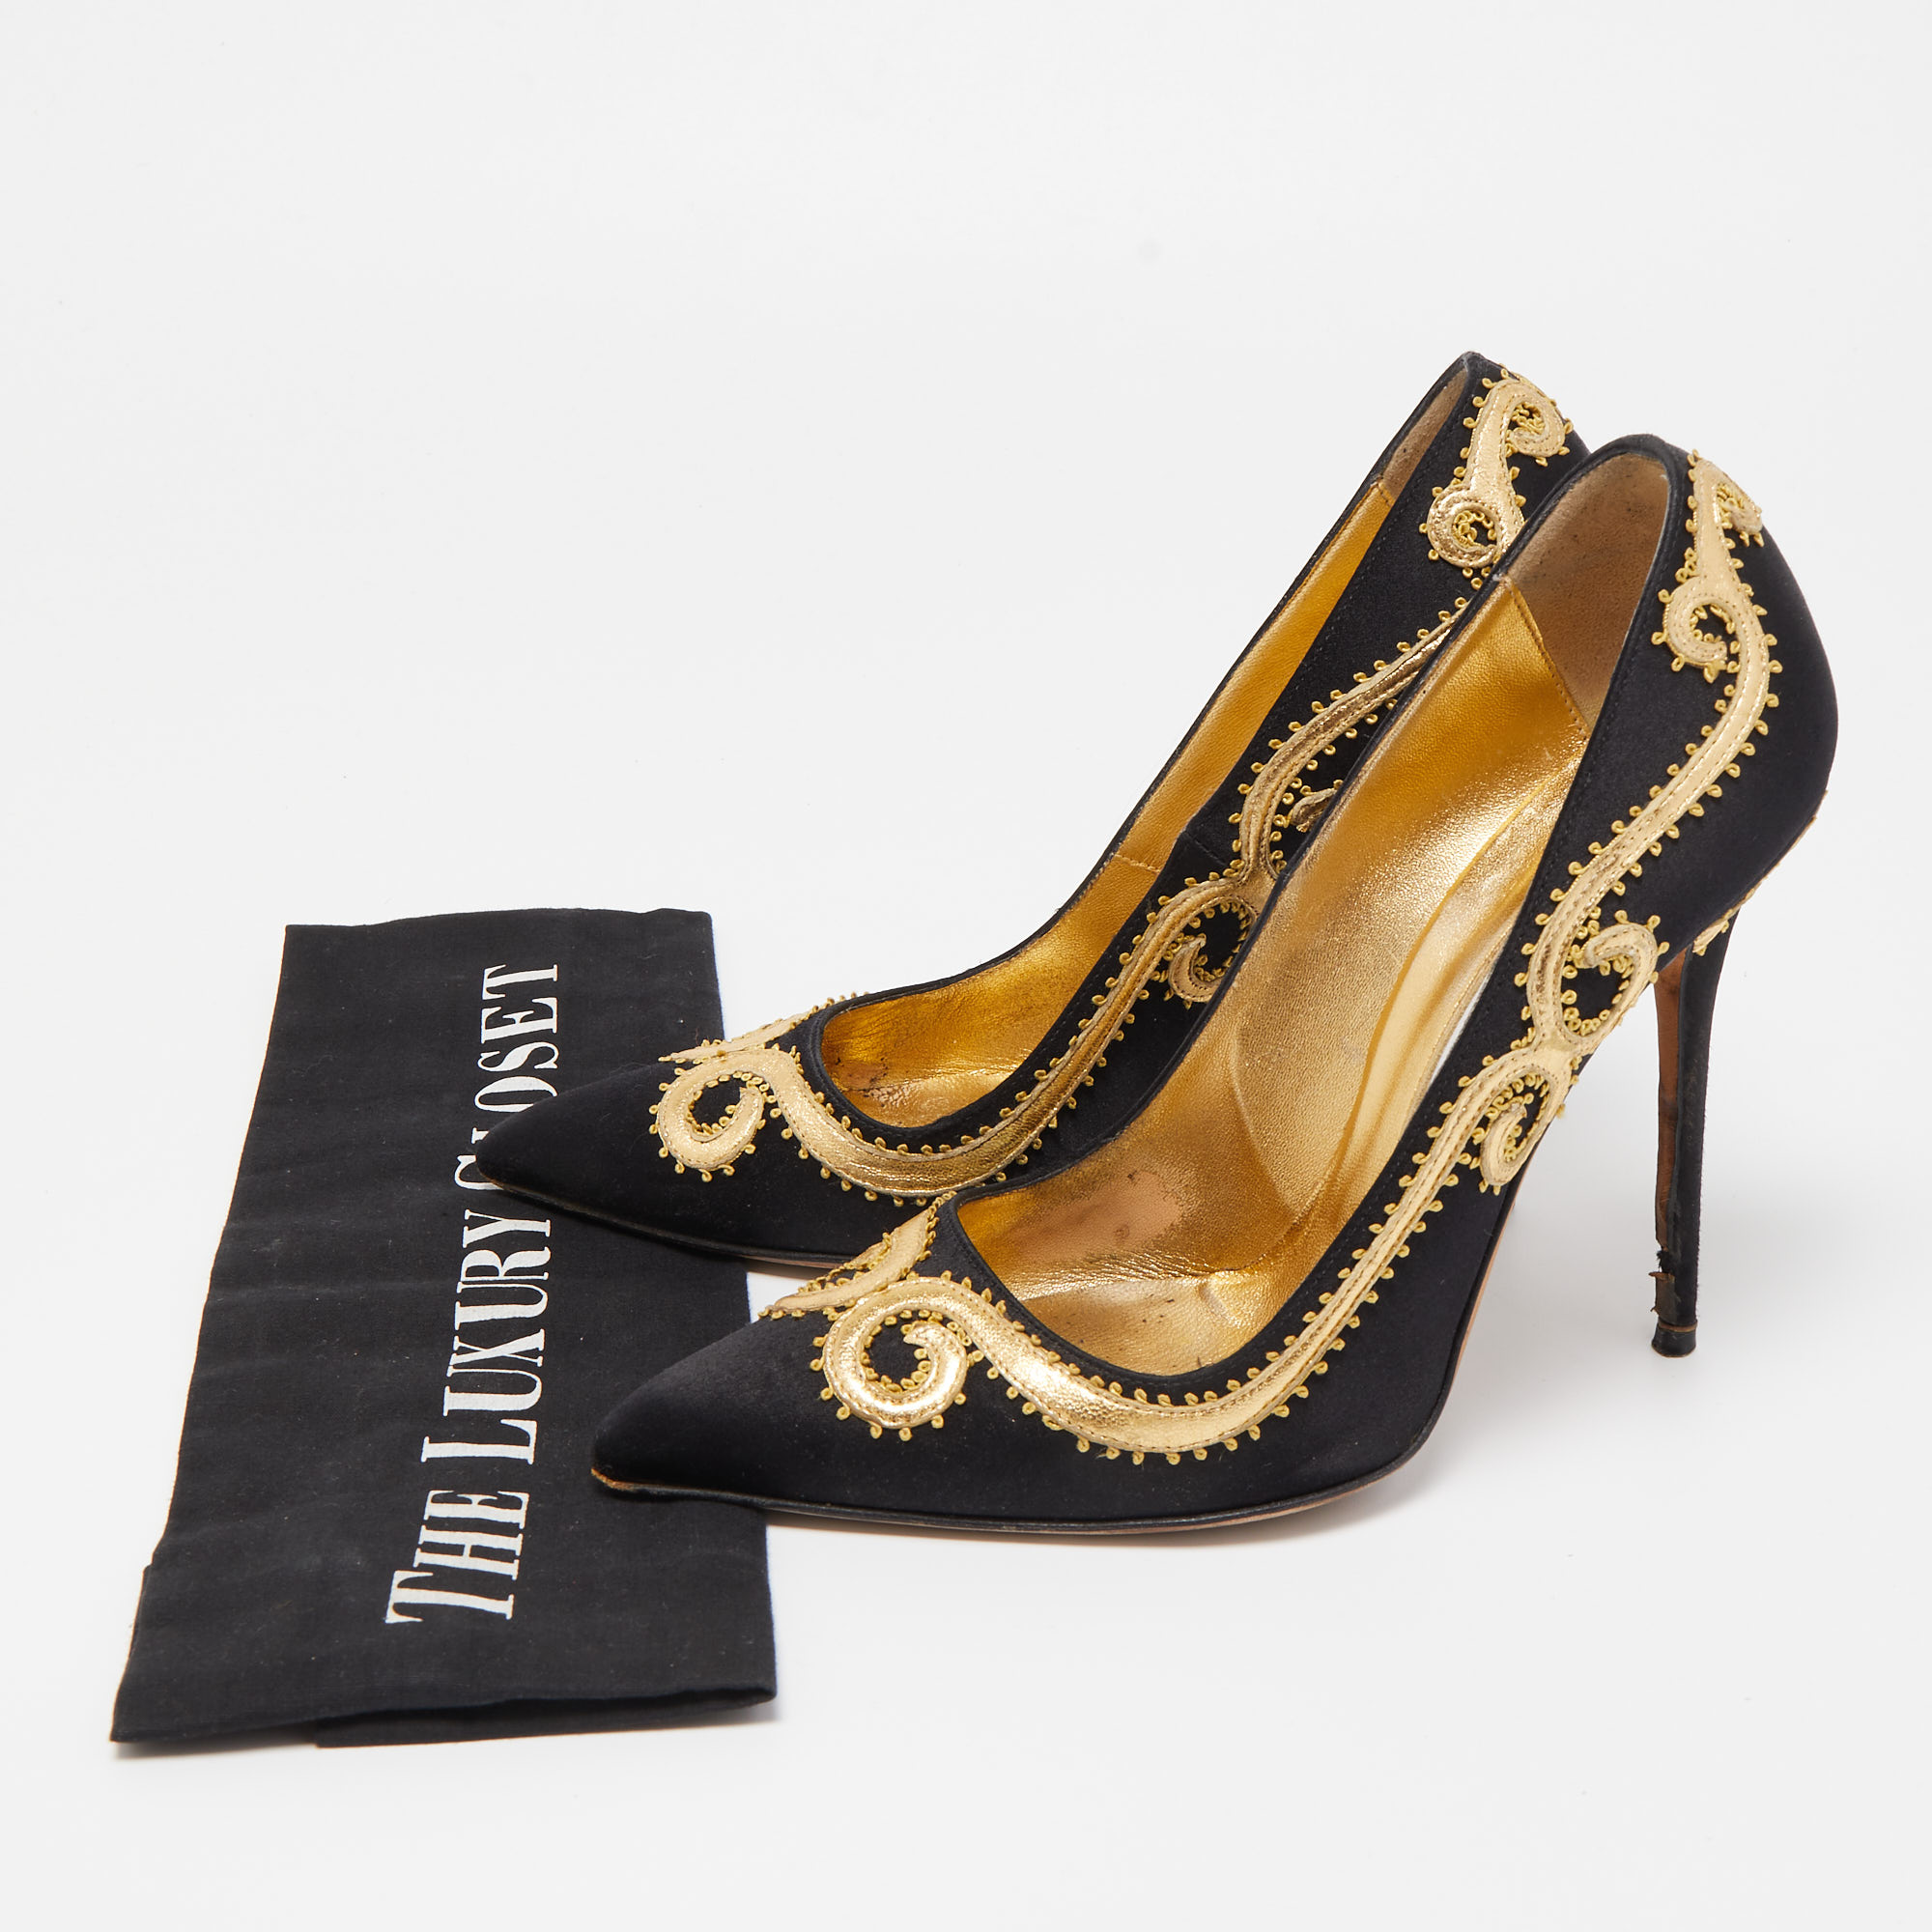 Manolo Blahnik Black/Gold Satin And Leather Embroidered Pumps Size 37